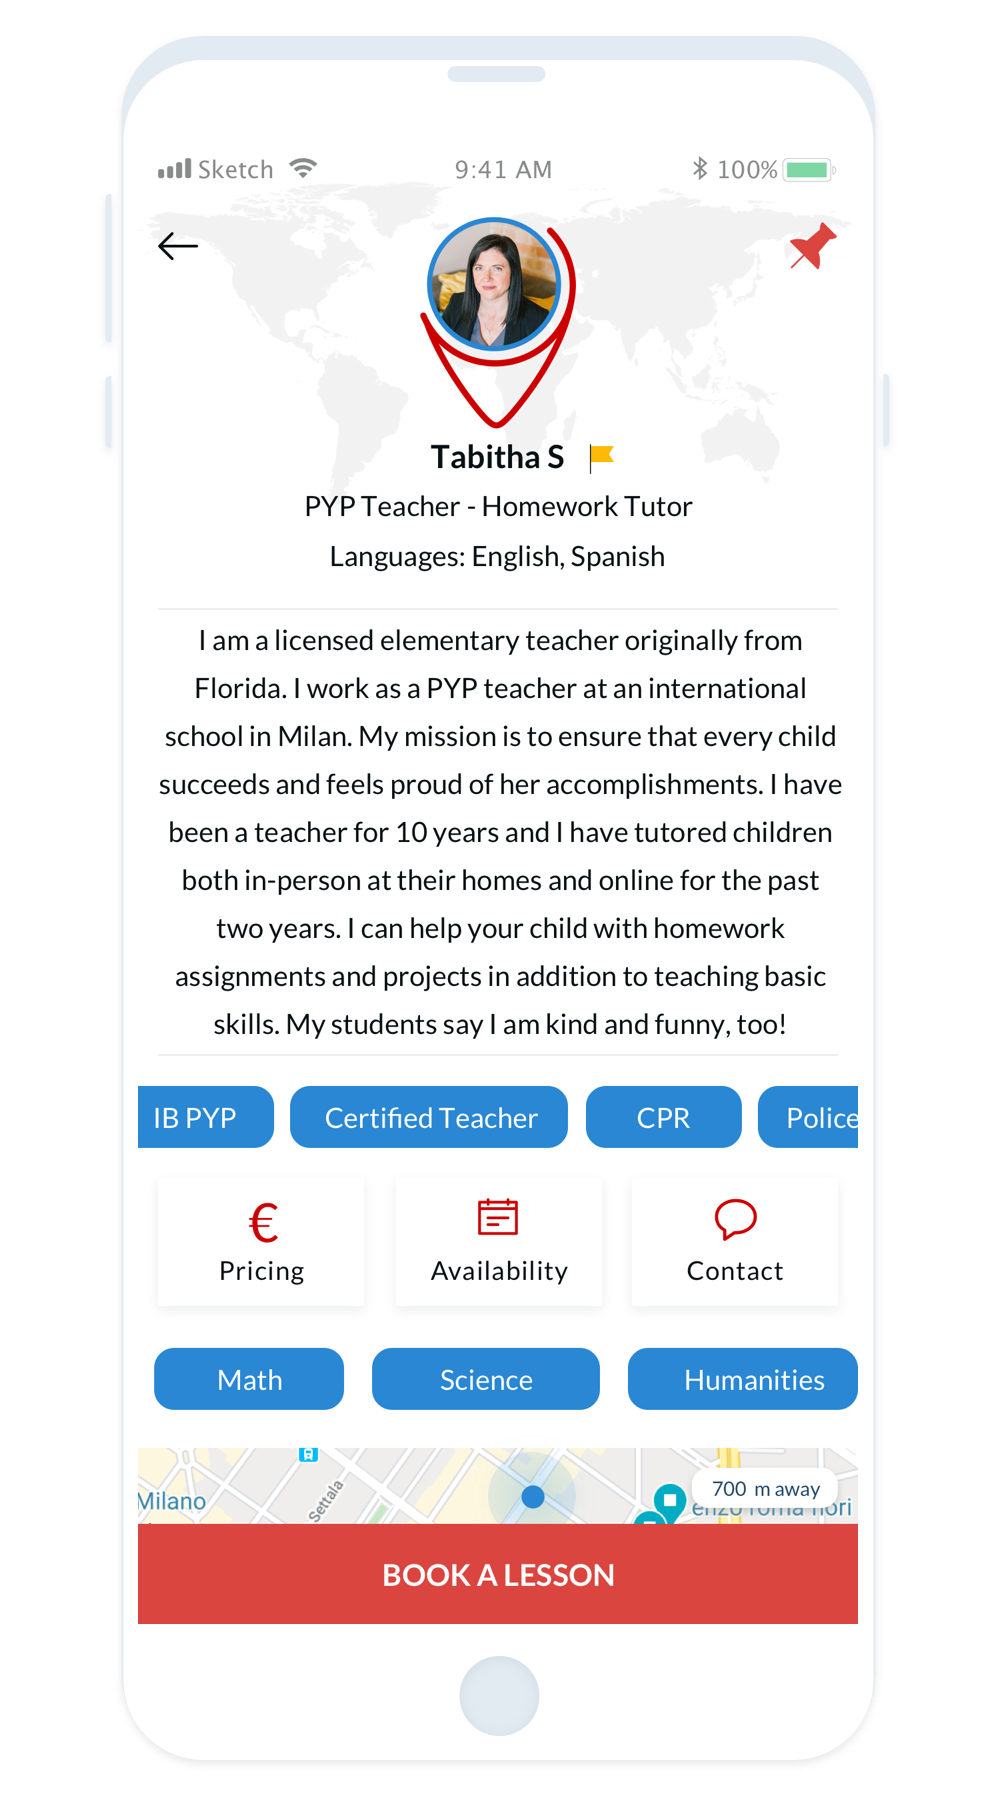 Find online or home tuition near me for help in English & IB learning. Find teachers for home tutoring for primary school.